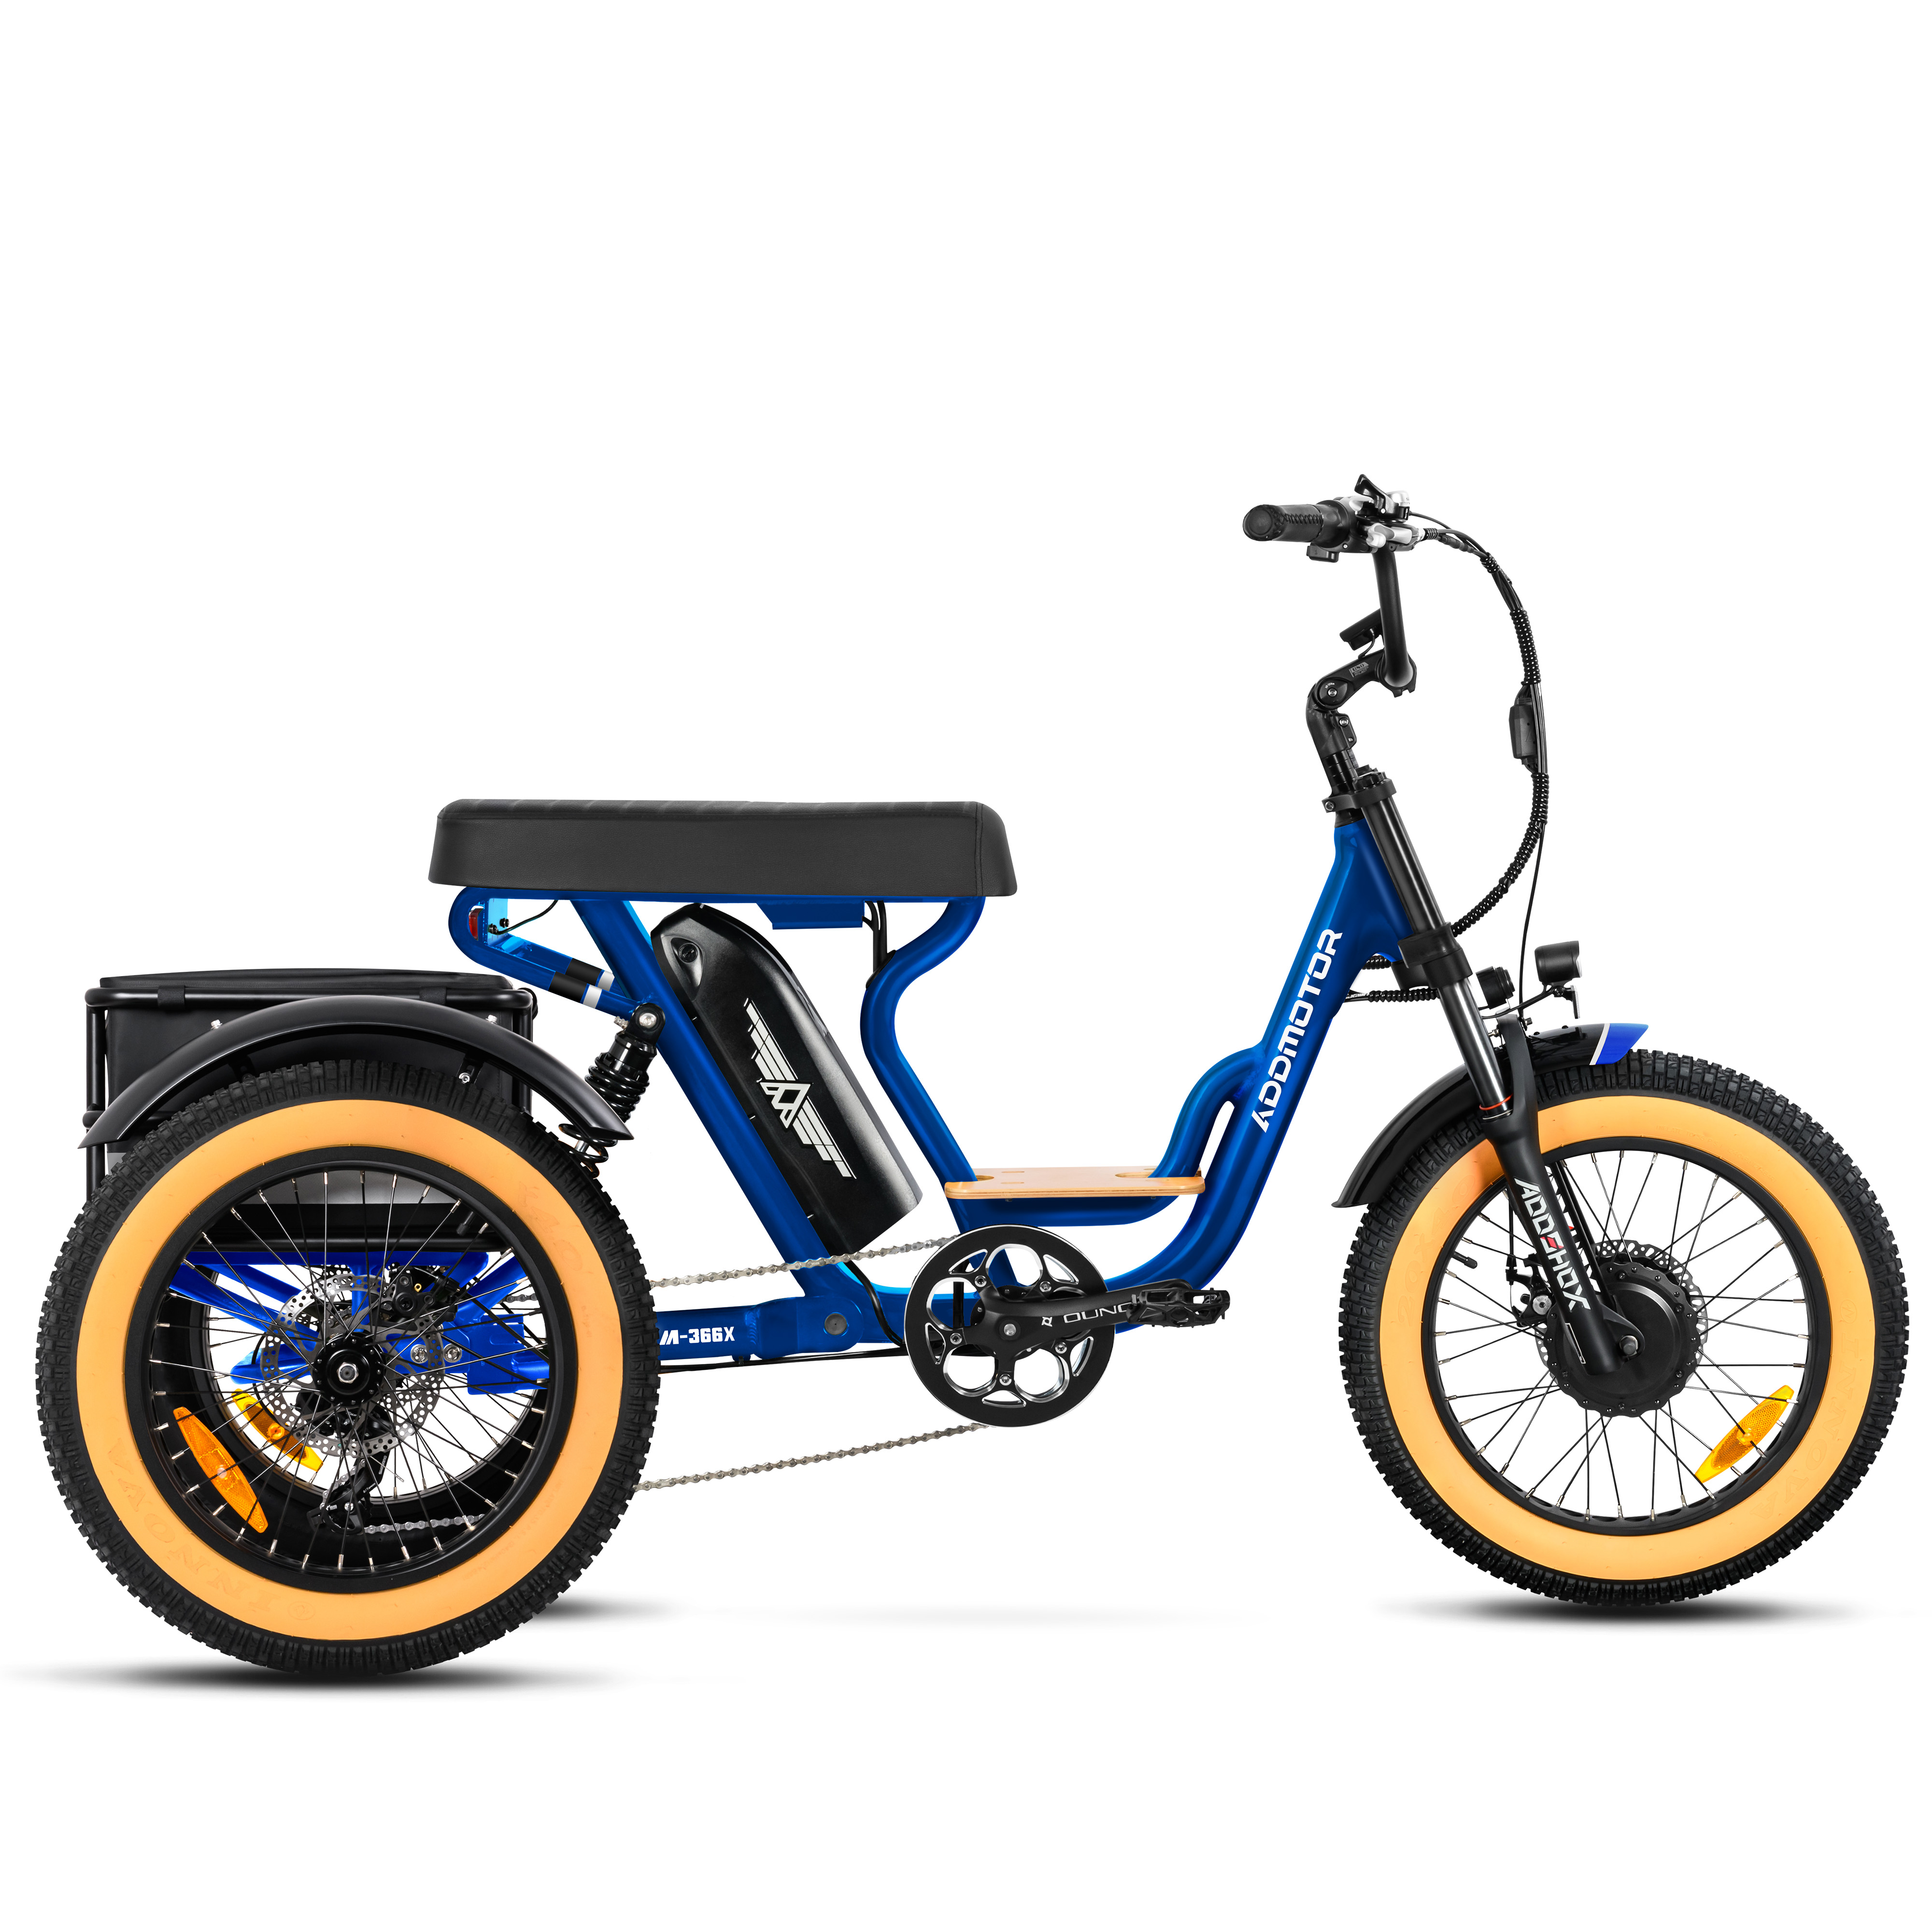 Addmotor Soletri M-366X Etrike for Adult - Fat Tire 3 Wheel Electric Tricycle for Two Person - Blue